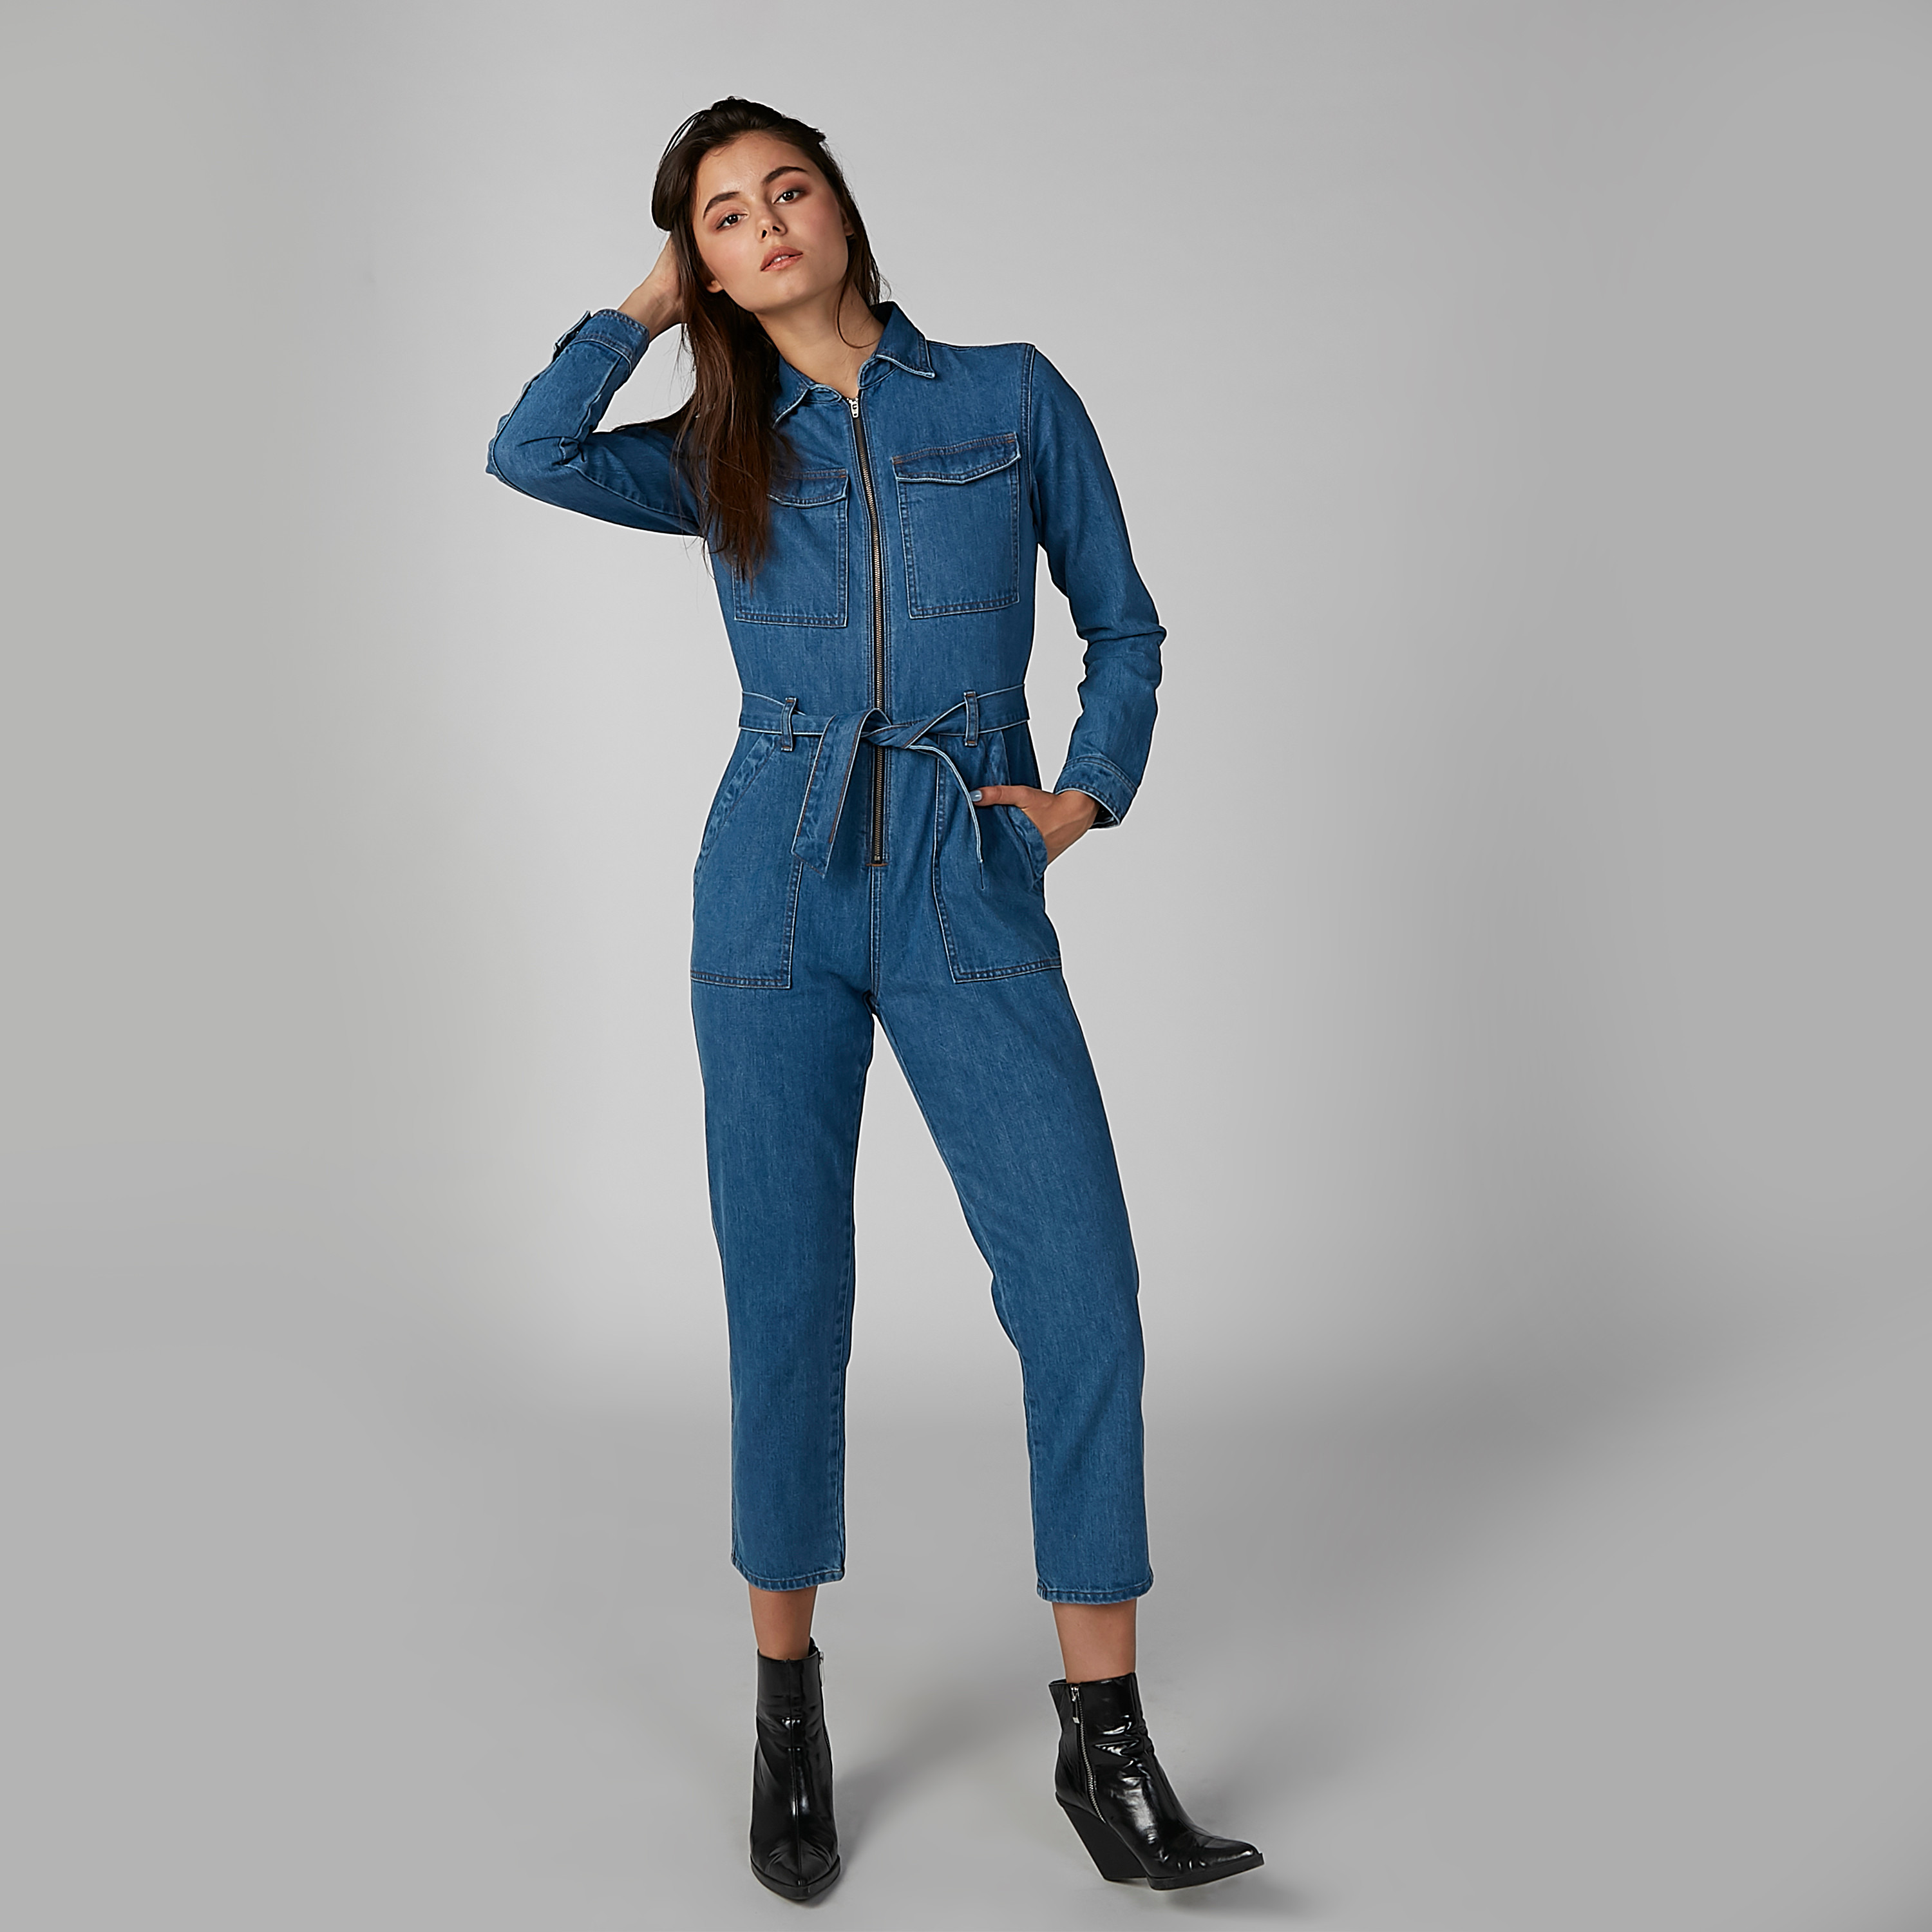 Top more than 185 lee cooper jumpsuit latest